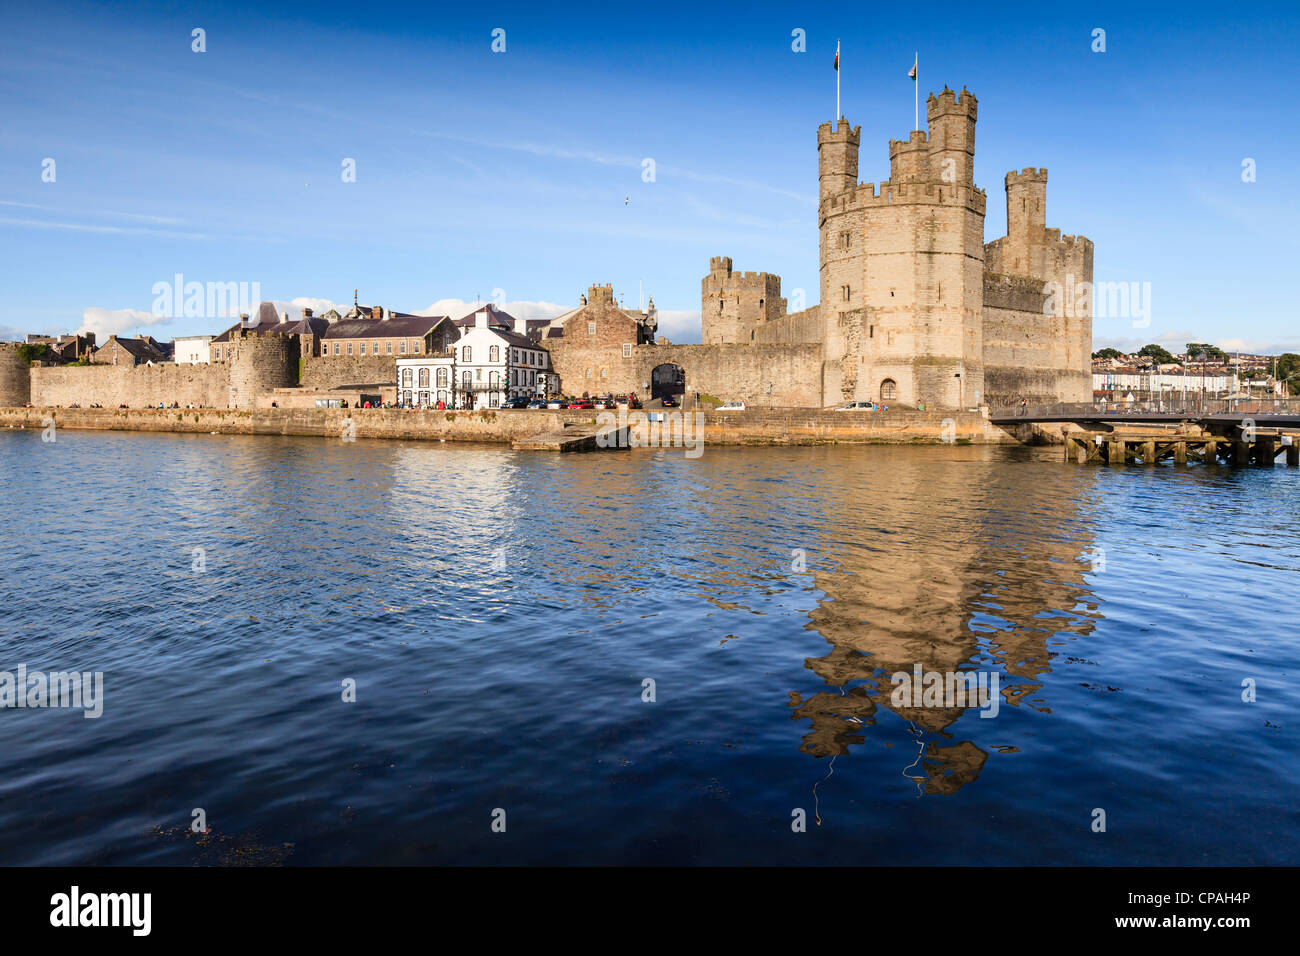 A bright summer evening at Caernarfon Castle, Gwynedd, North Wales. The castle is reflected in the River Stock Photo